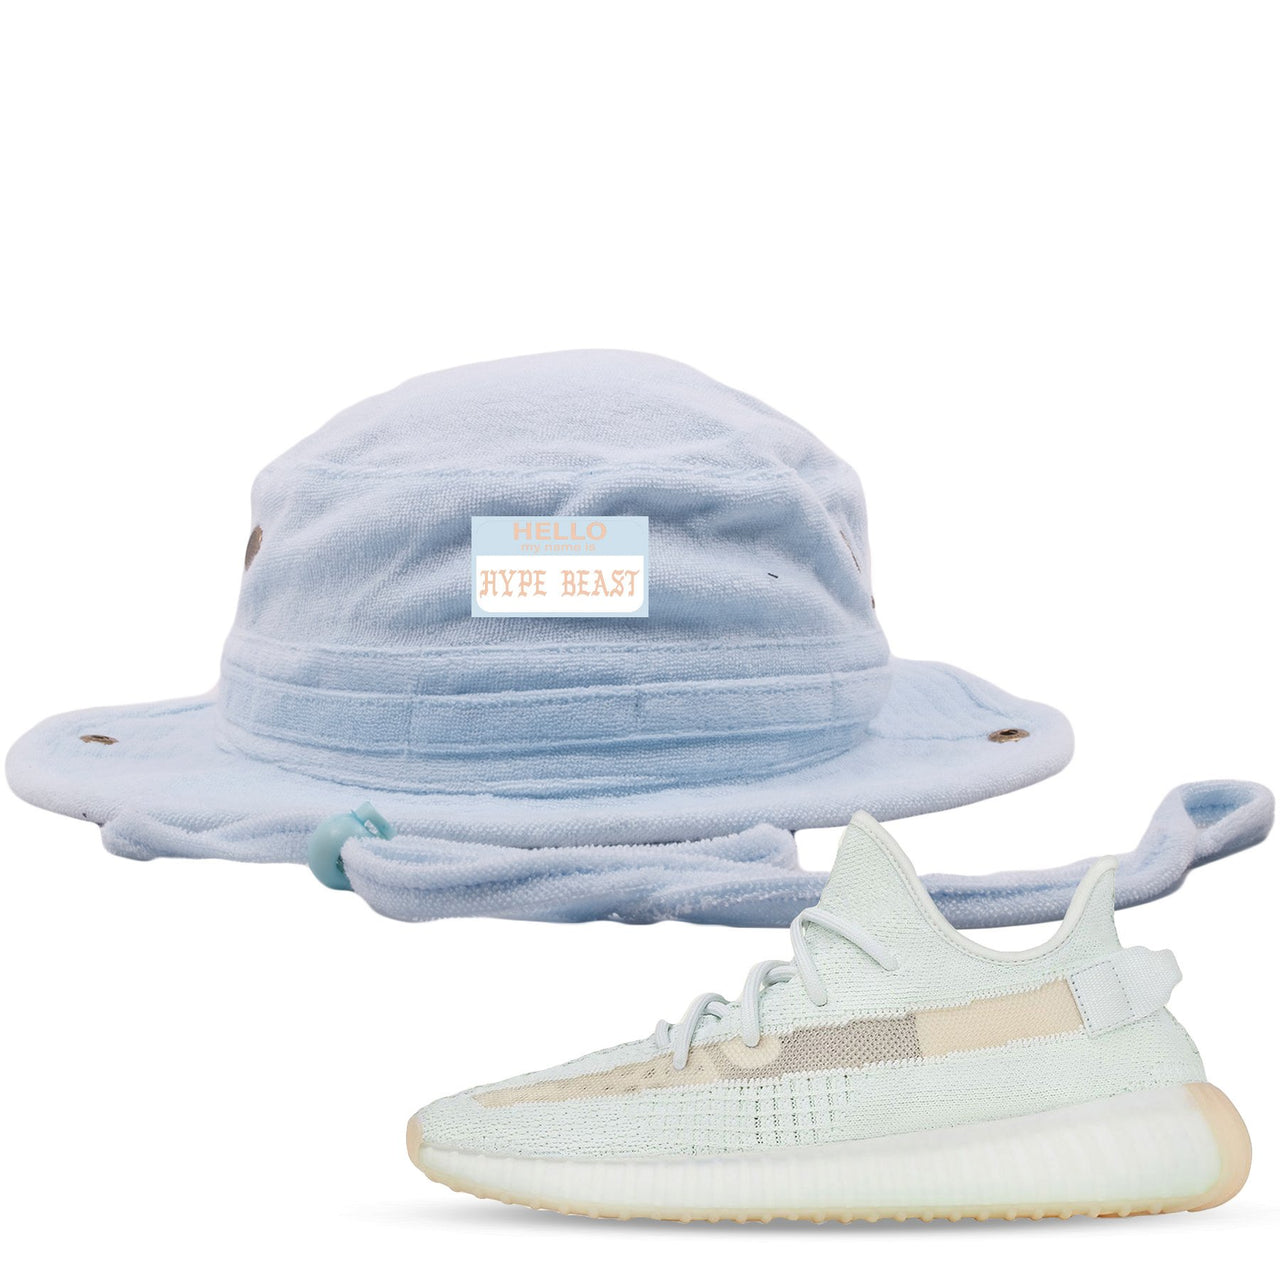 Hyperspace 350s Bucket Hat | Hello My Name Is Hype Beast Pablo, Light Blue